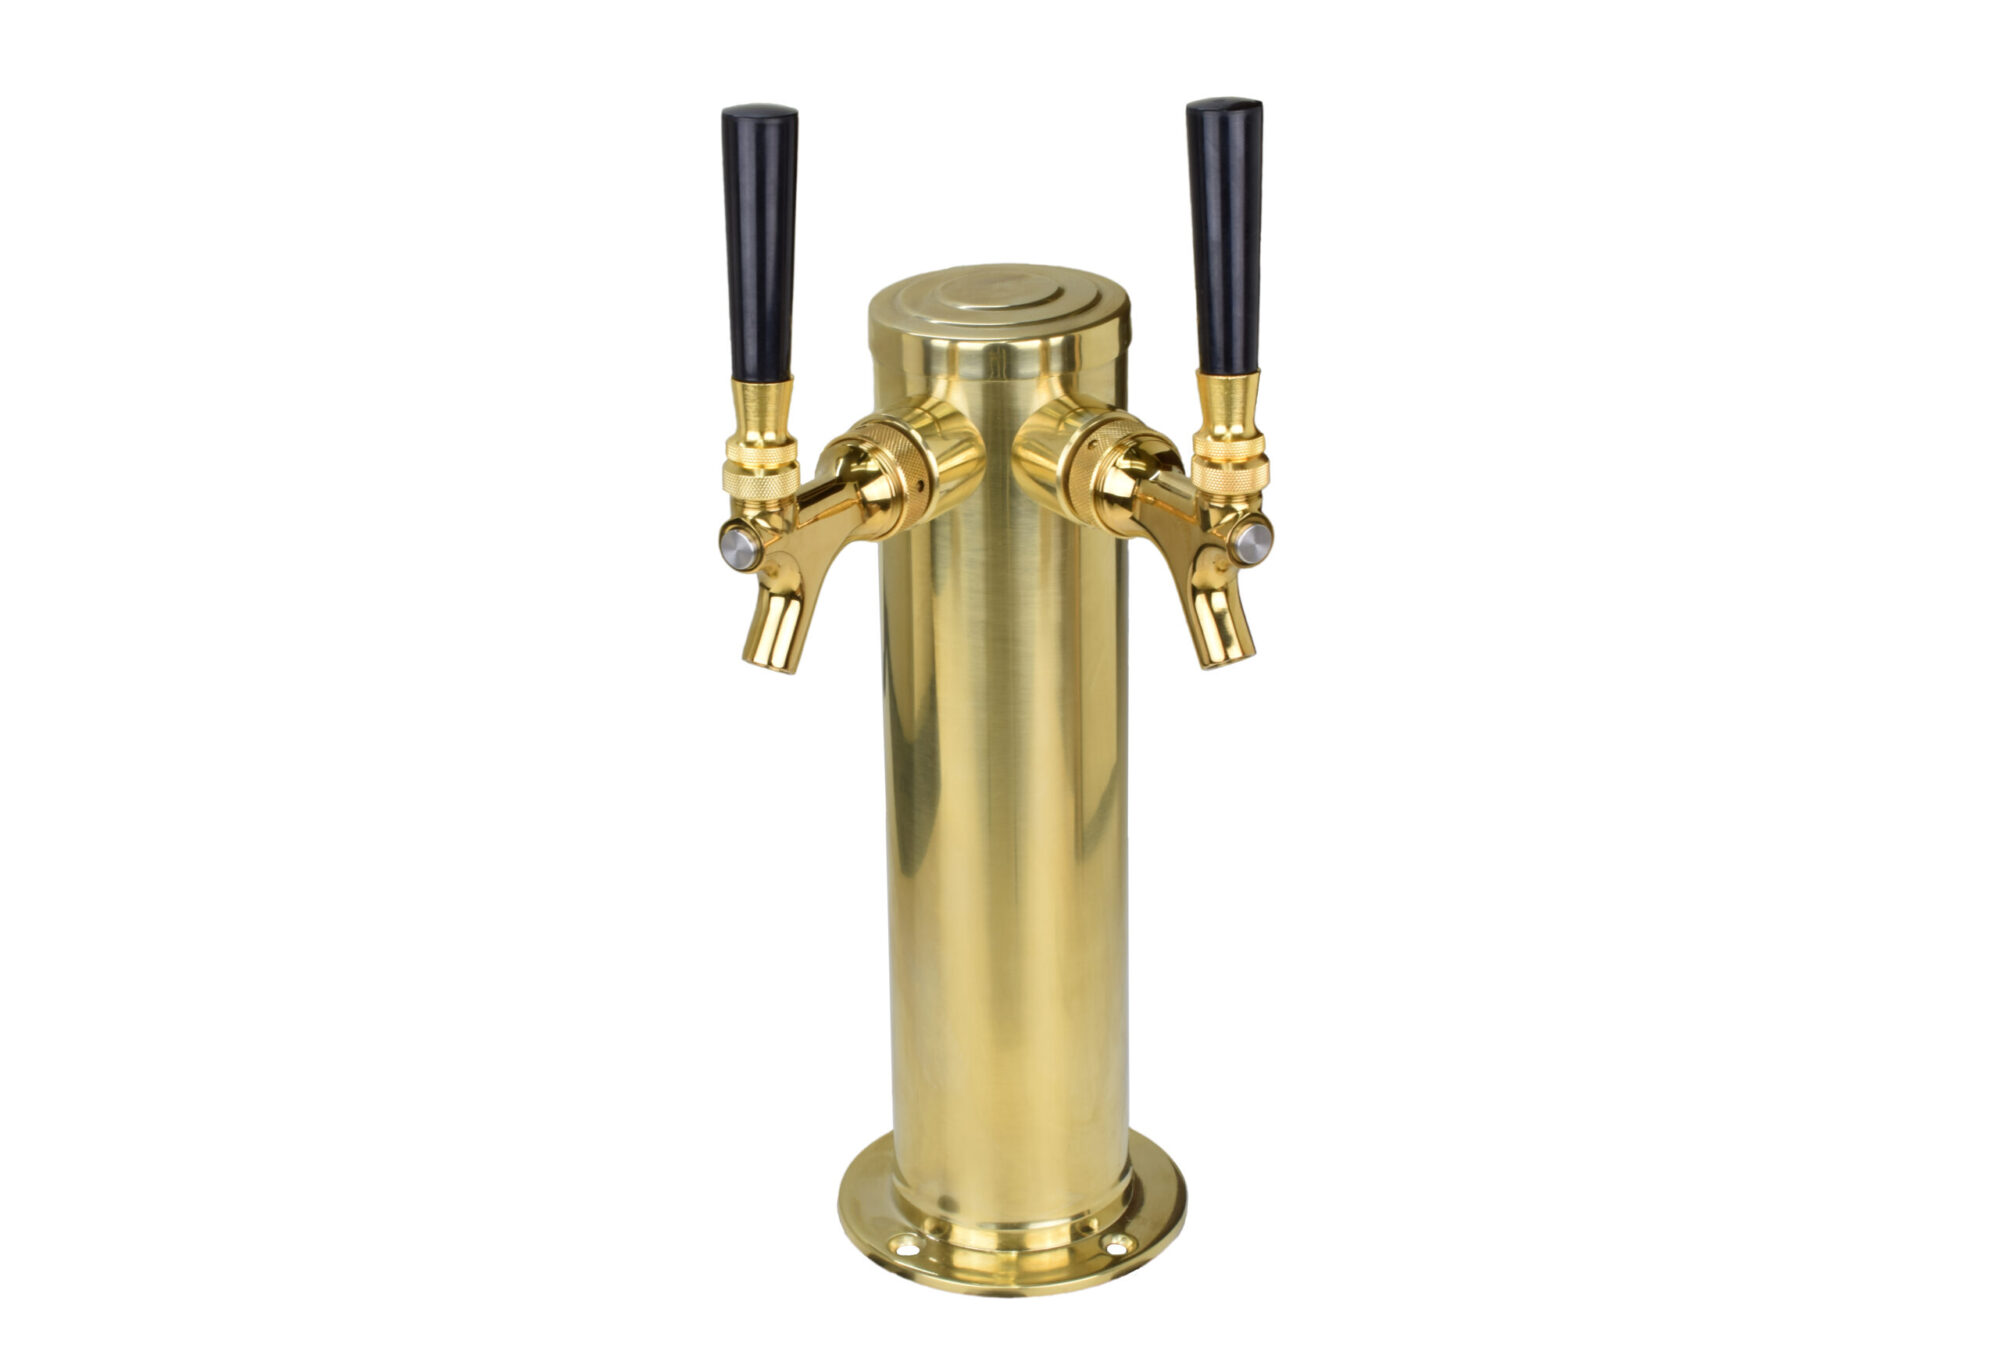 619PVD-SSW Two Faucet PVD Column With PVD Coated SS Faucets and SS Shanks